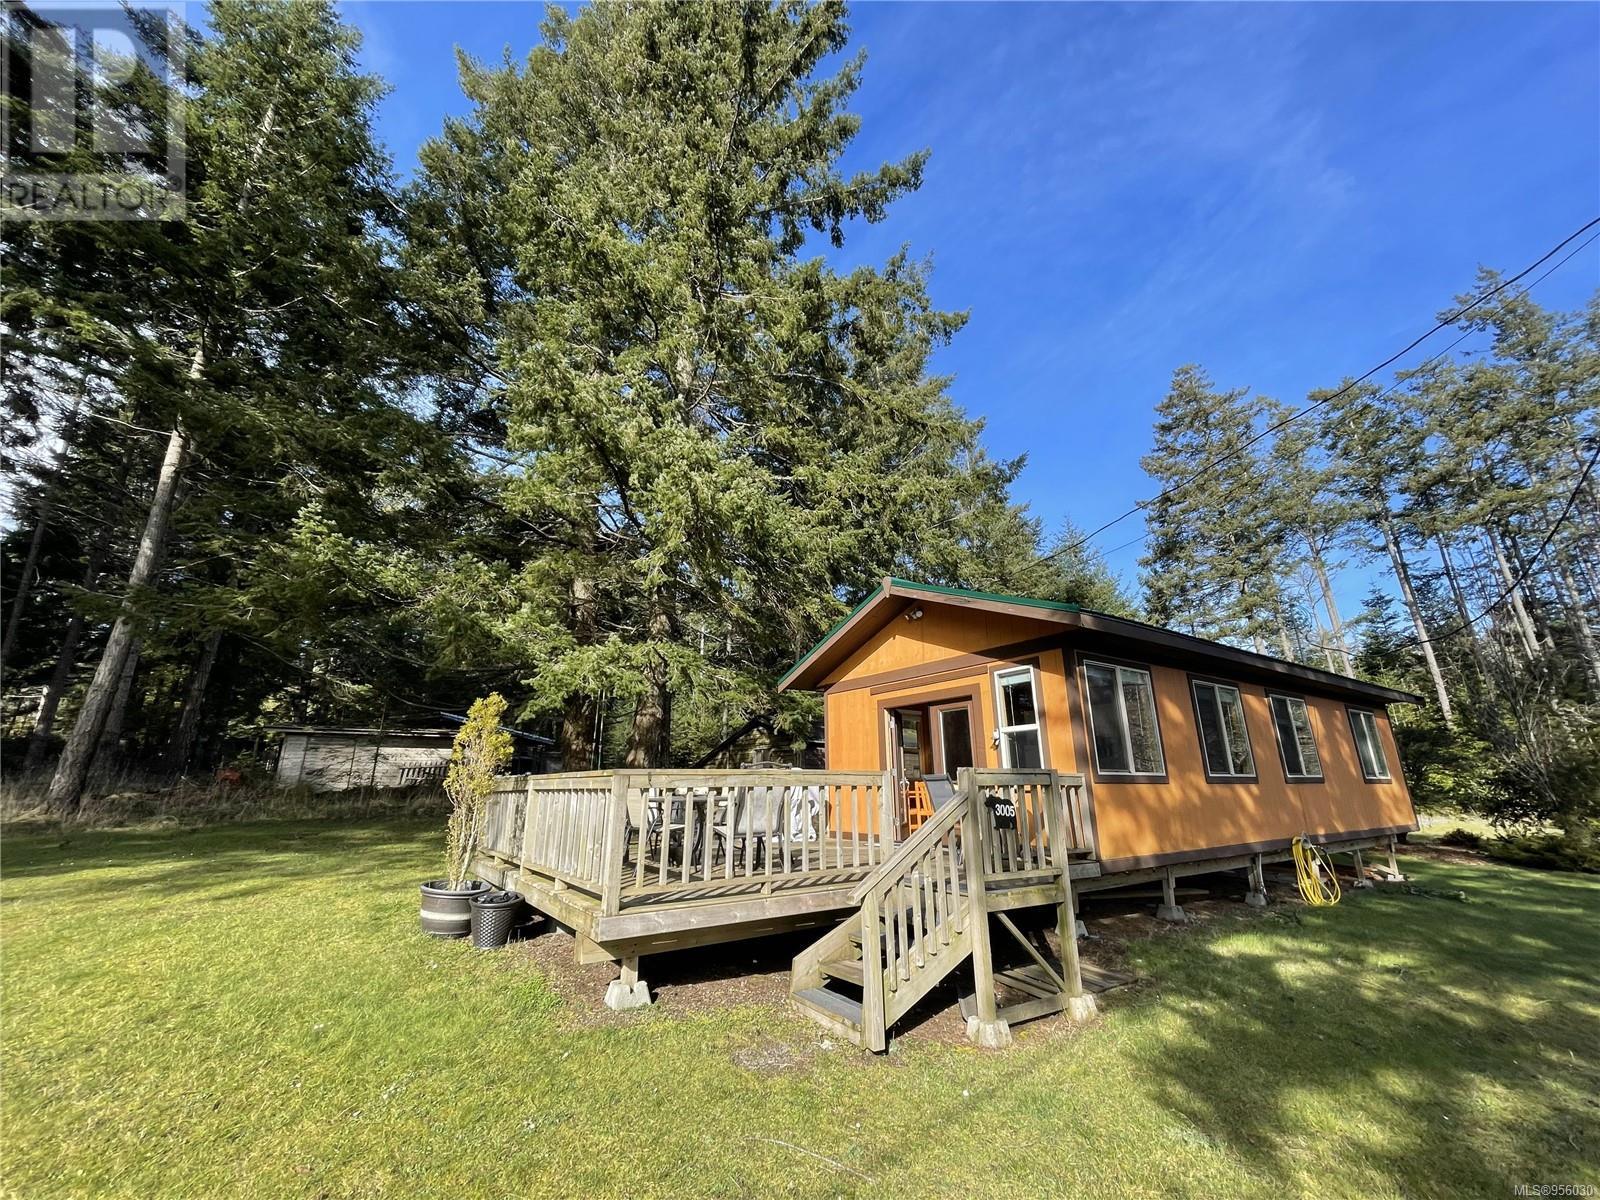 Hornby Island House for sale:  1 bedroom 640 sq.ft. (Listed 2106-02-06)